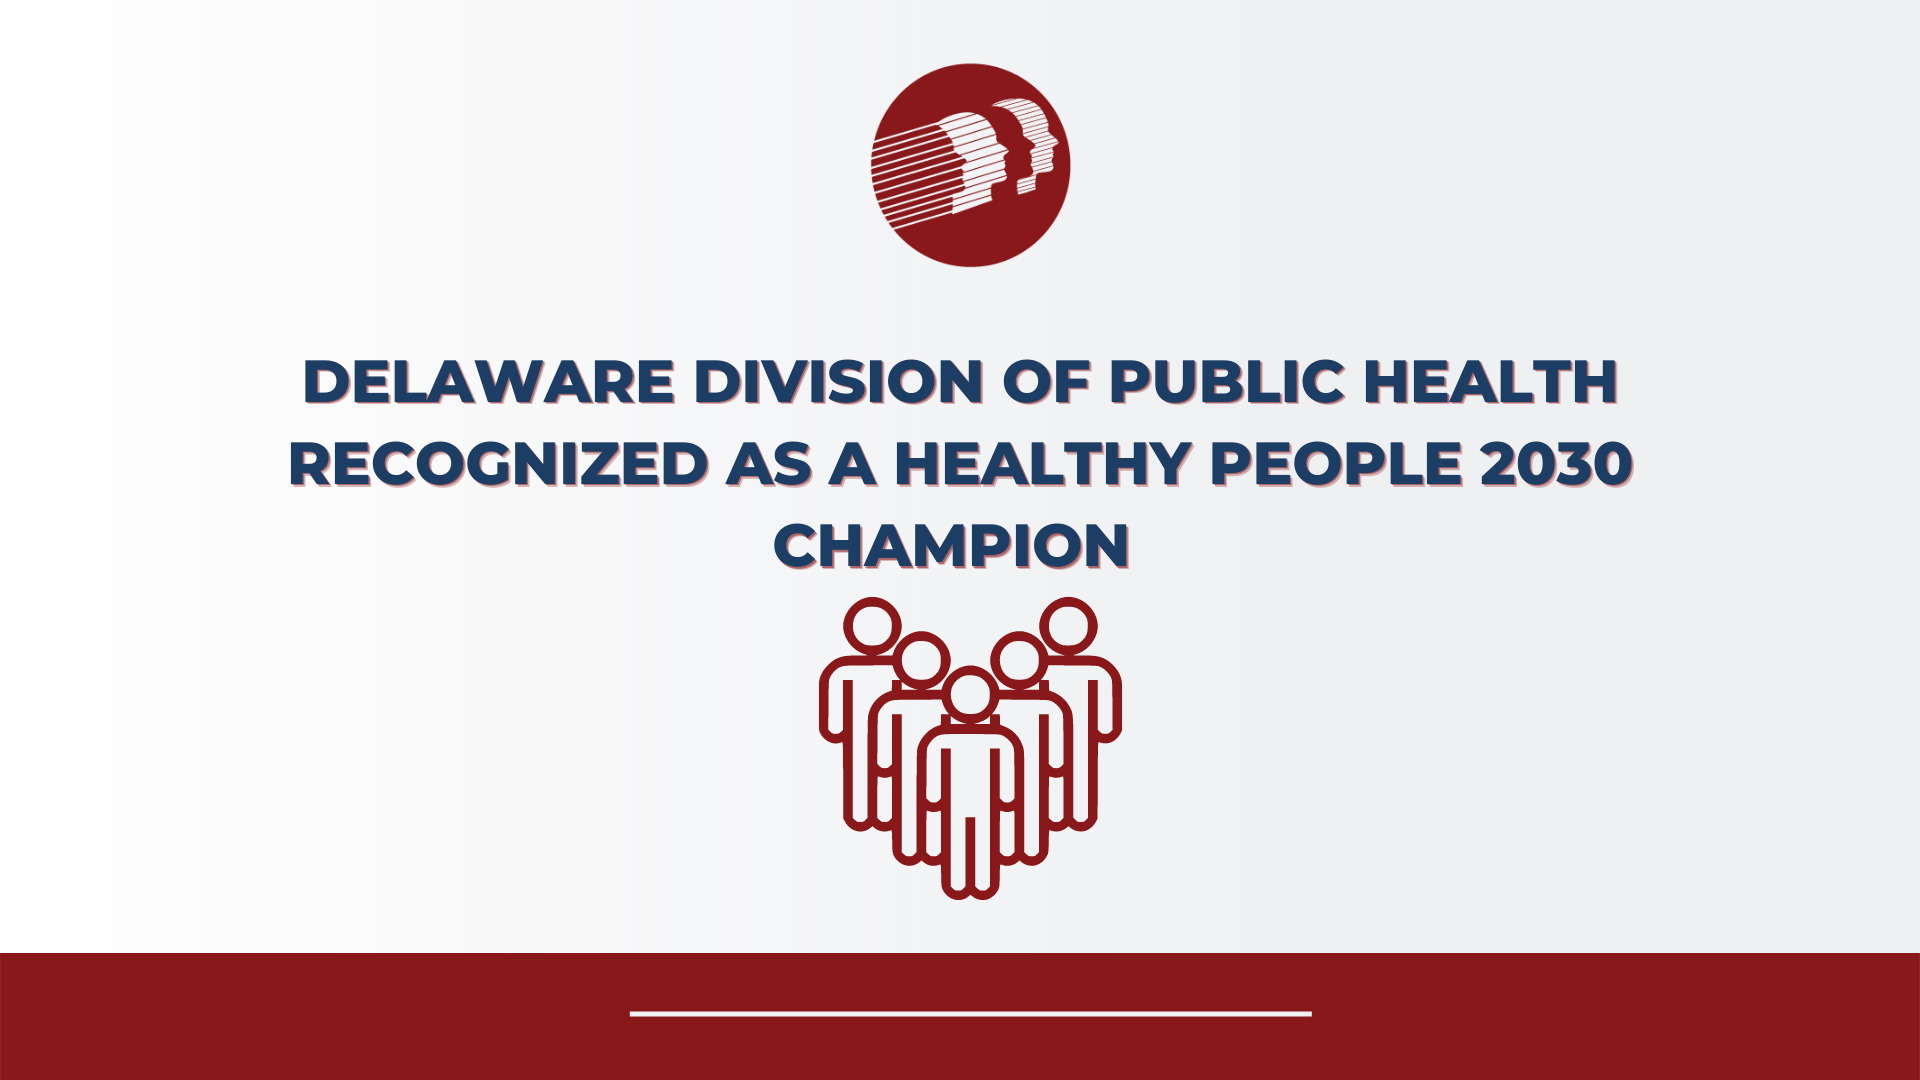 DELAWARE DIVISION OF PUBLIC HEALTH RECOGNIZED AS A HEALTHY PEOPLE 2030 CHAMPION